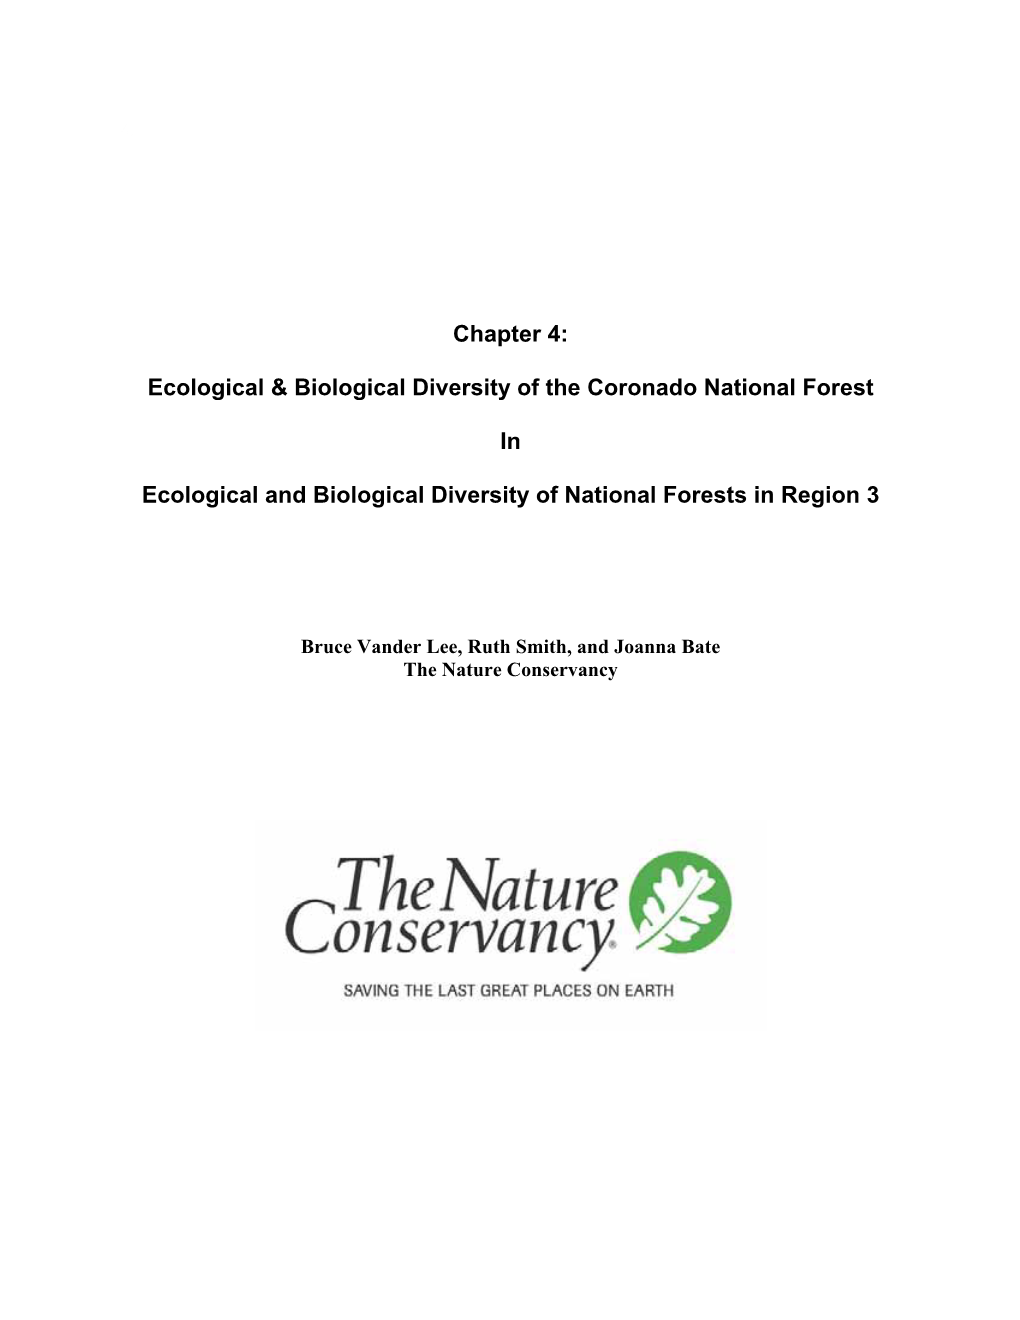 Chapter 4: Ecological & Biological Diversity of the Coronado National Forest